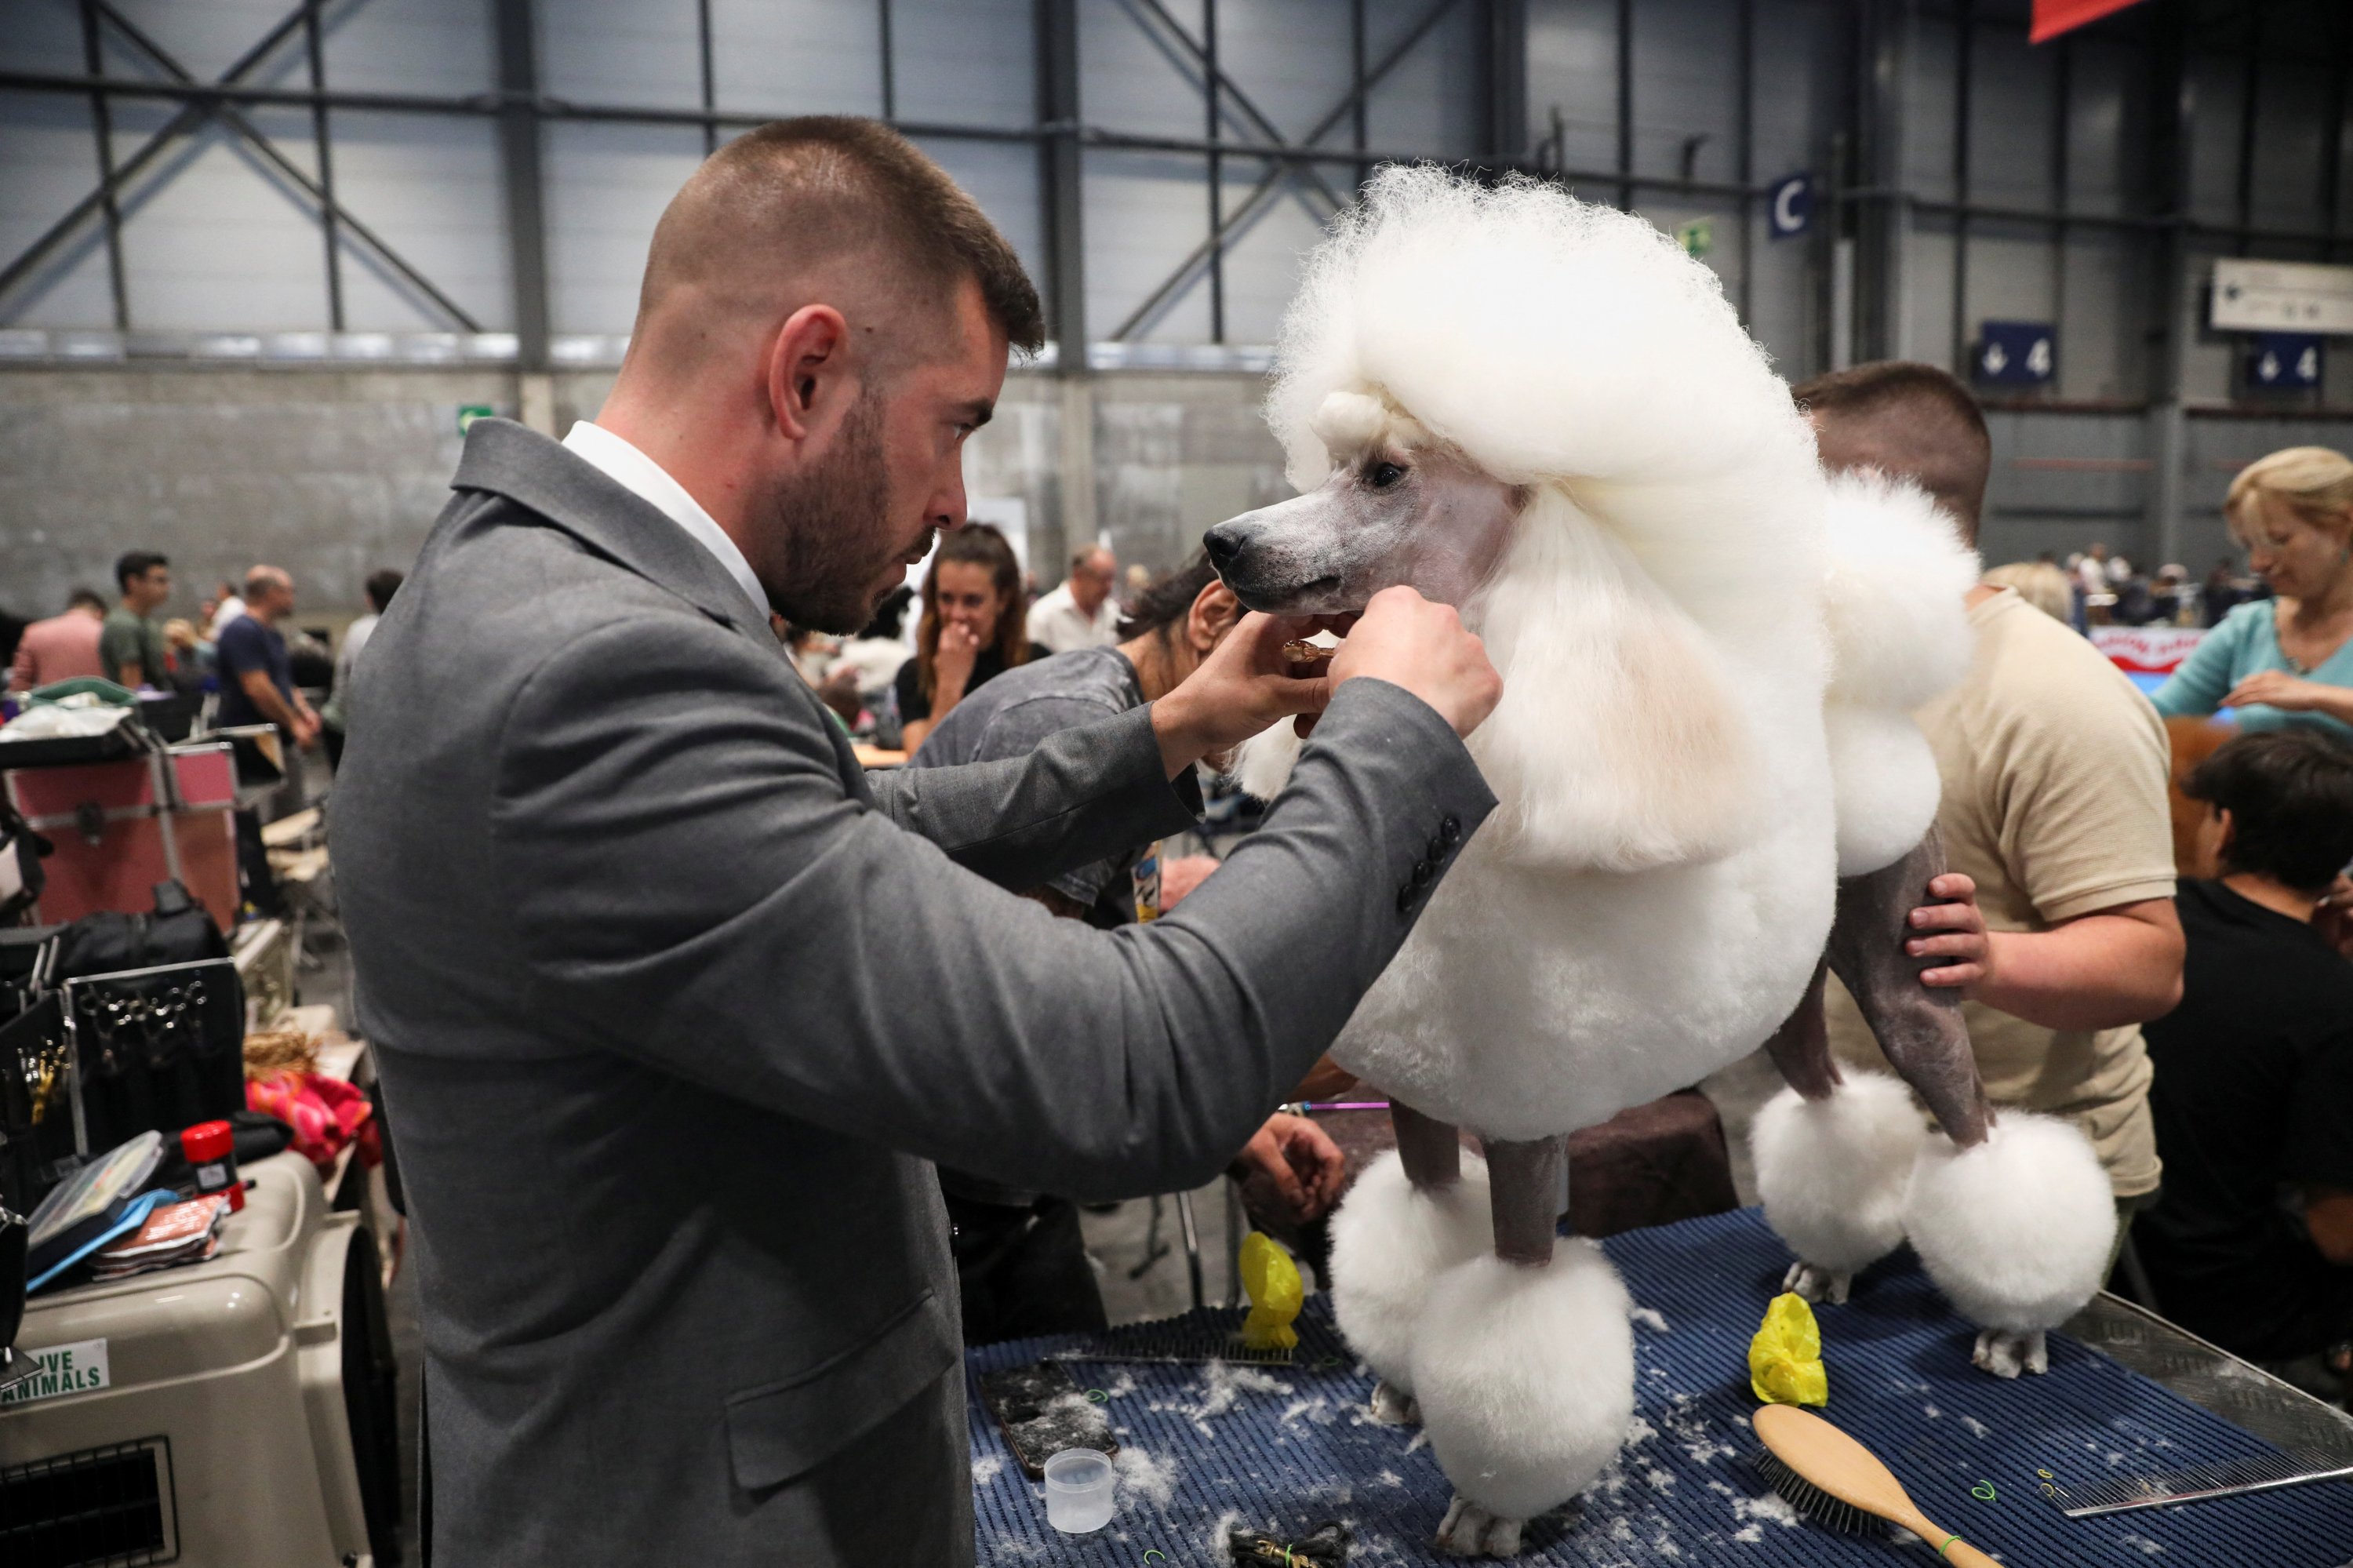 A man grooms his Standard Poodle at the 2022 World Dog Show, where more than 15,000 dogs from all around the globe are expected to attend, at the IFEMA conference center in Madrid, Spain, June, 23, 2022. (Reuters Photo)